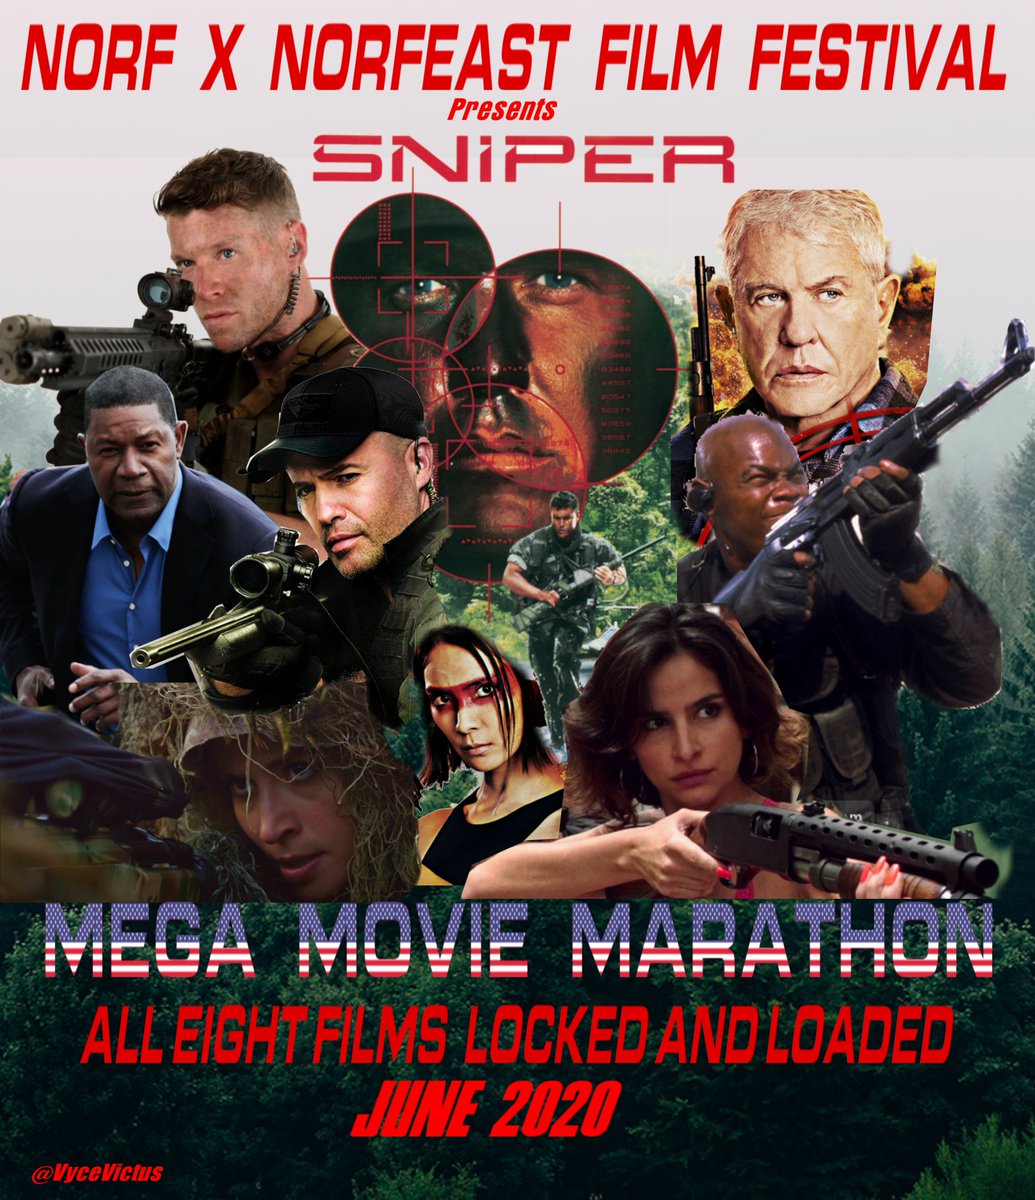 So much has happened, but I want to try to save the summer in my own small way. I hope you'll join me.THE NORF X NORFEAST FILM FESTIVAL PRESENTSTHE SNIPER MEGA MOVIE MARATHONThe entire franchise, including SNIPER: ASSASSIN'S END, out June 16th on Blu/VOD. More details soon